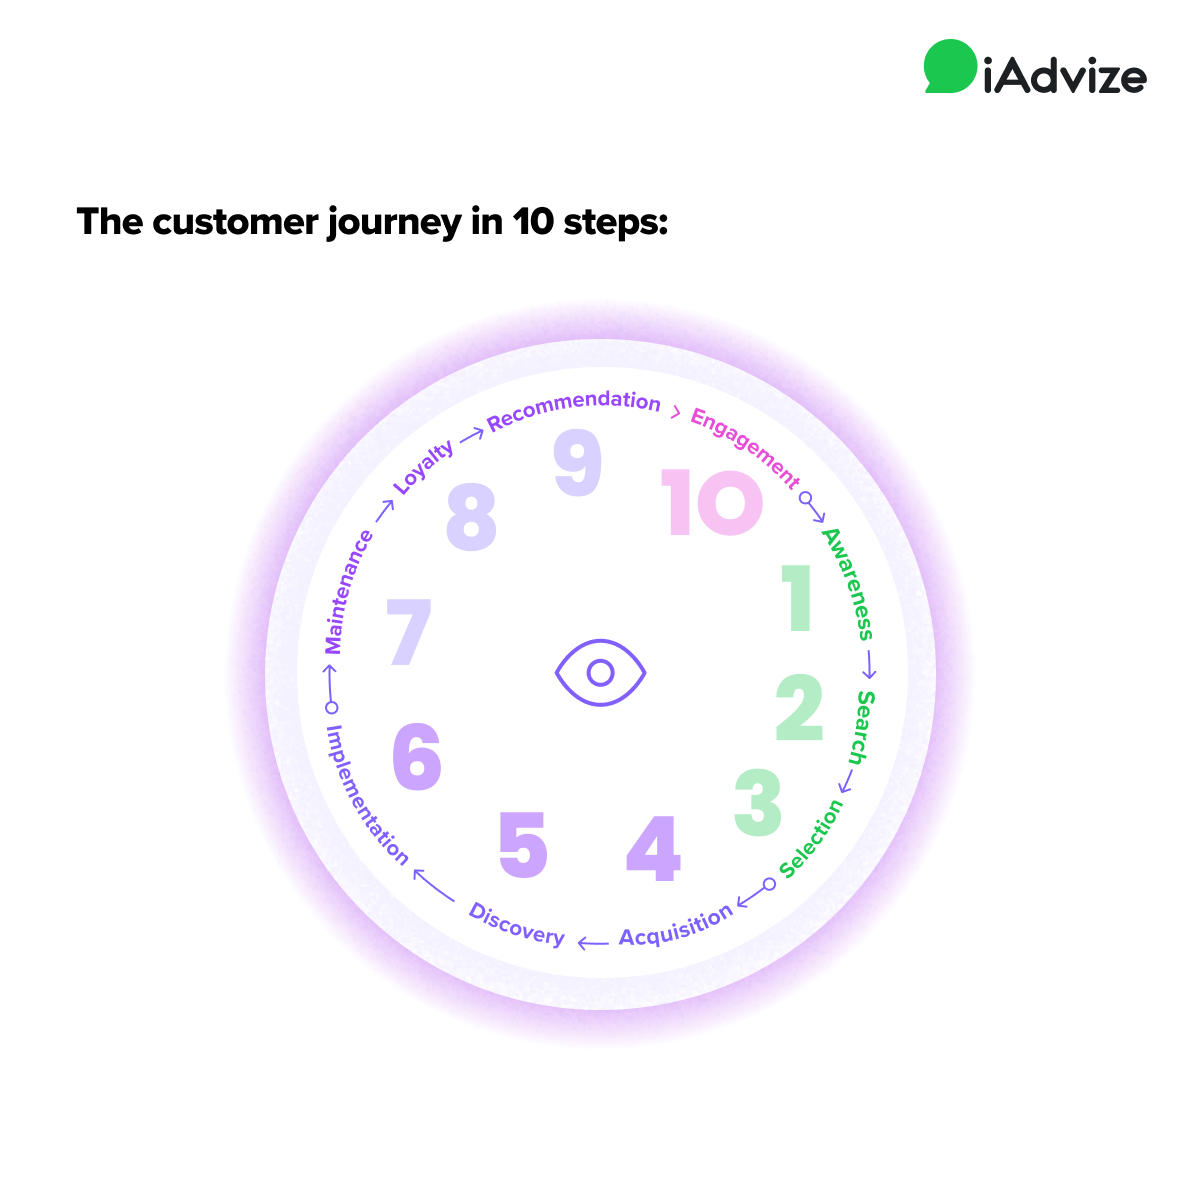 Circle graphic describing customer journey: 1-Awareness, 2-Search, 3-Selection, 4-Acquisition, 5- Discovery, 6-Implementation, 7-Maintenance, 8-Loyalty, 9-Recommendation, 10-Engagement